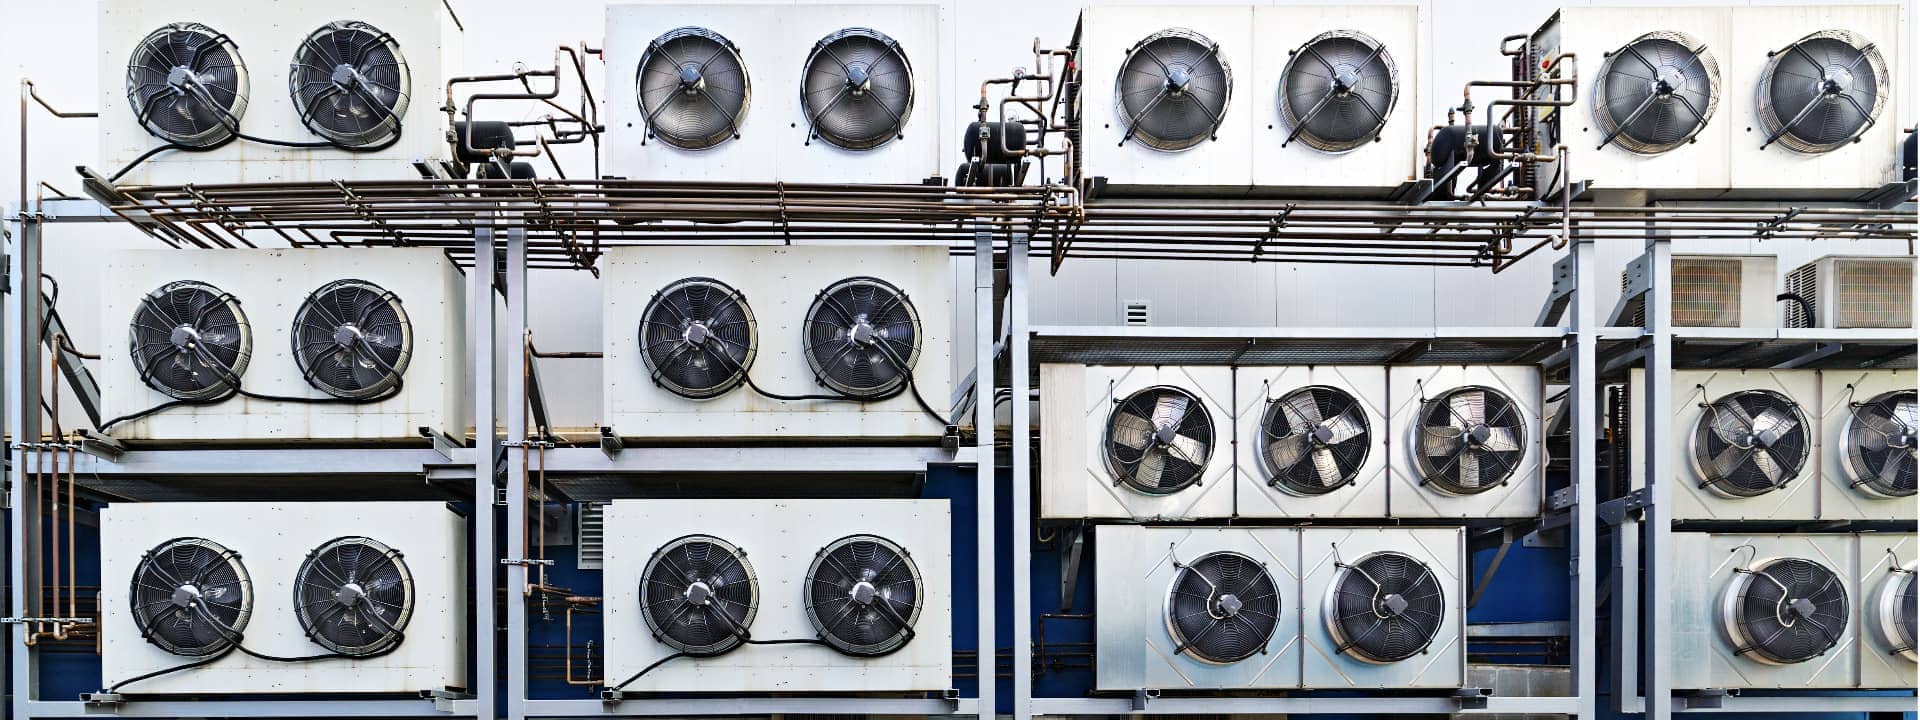 LATEST SPECIAL ISSUE: Alternatives to Air Conditioning »